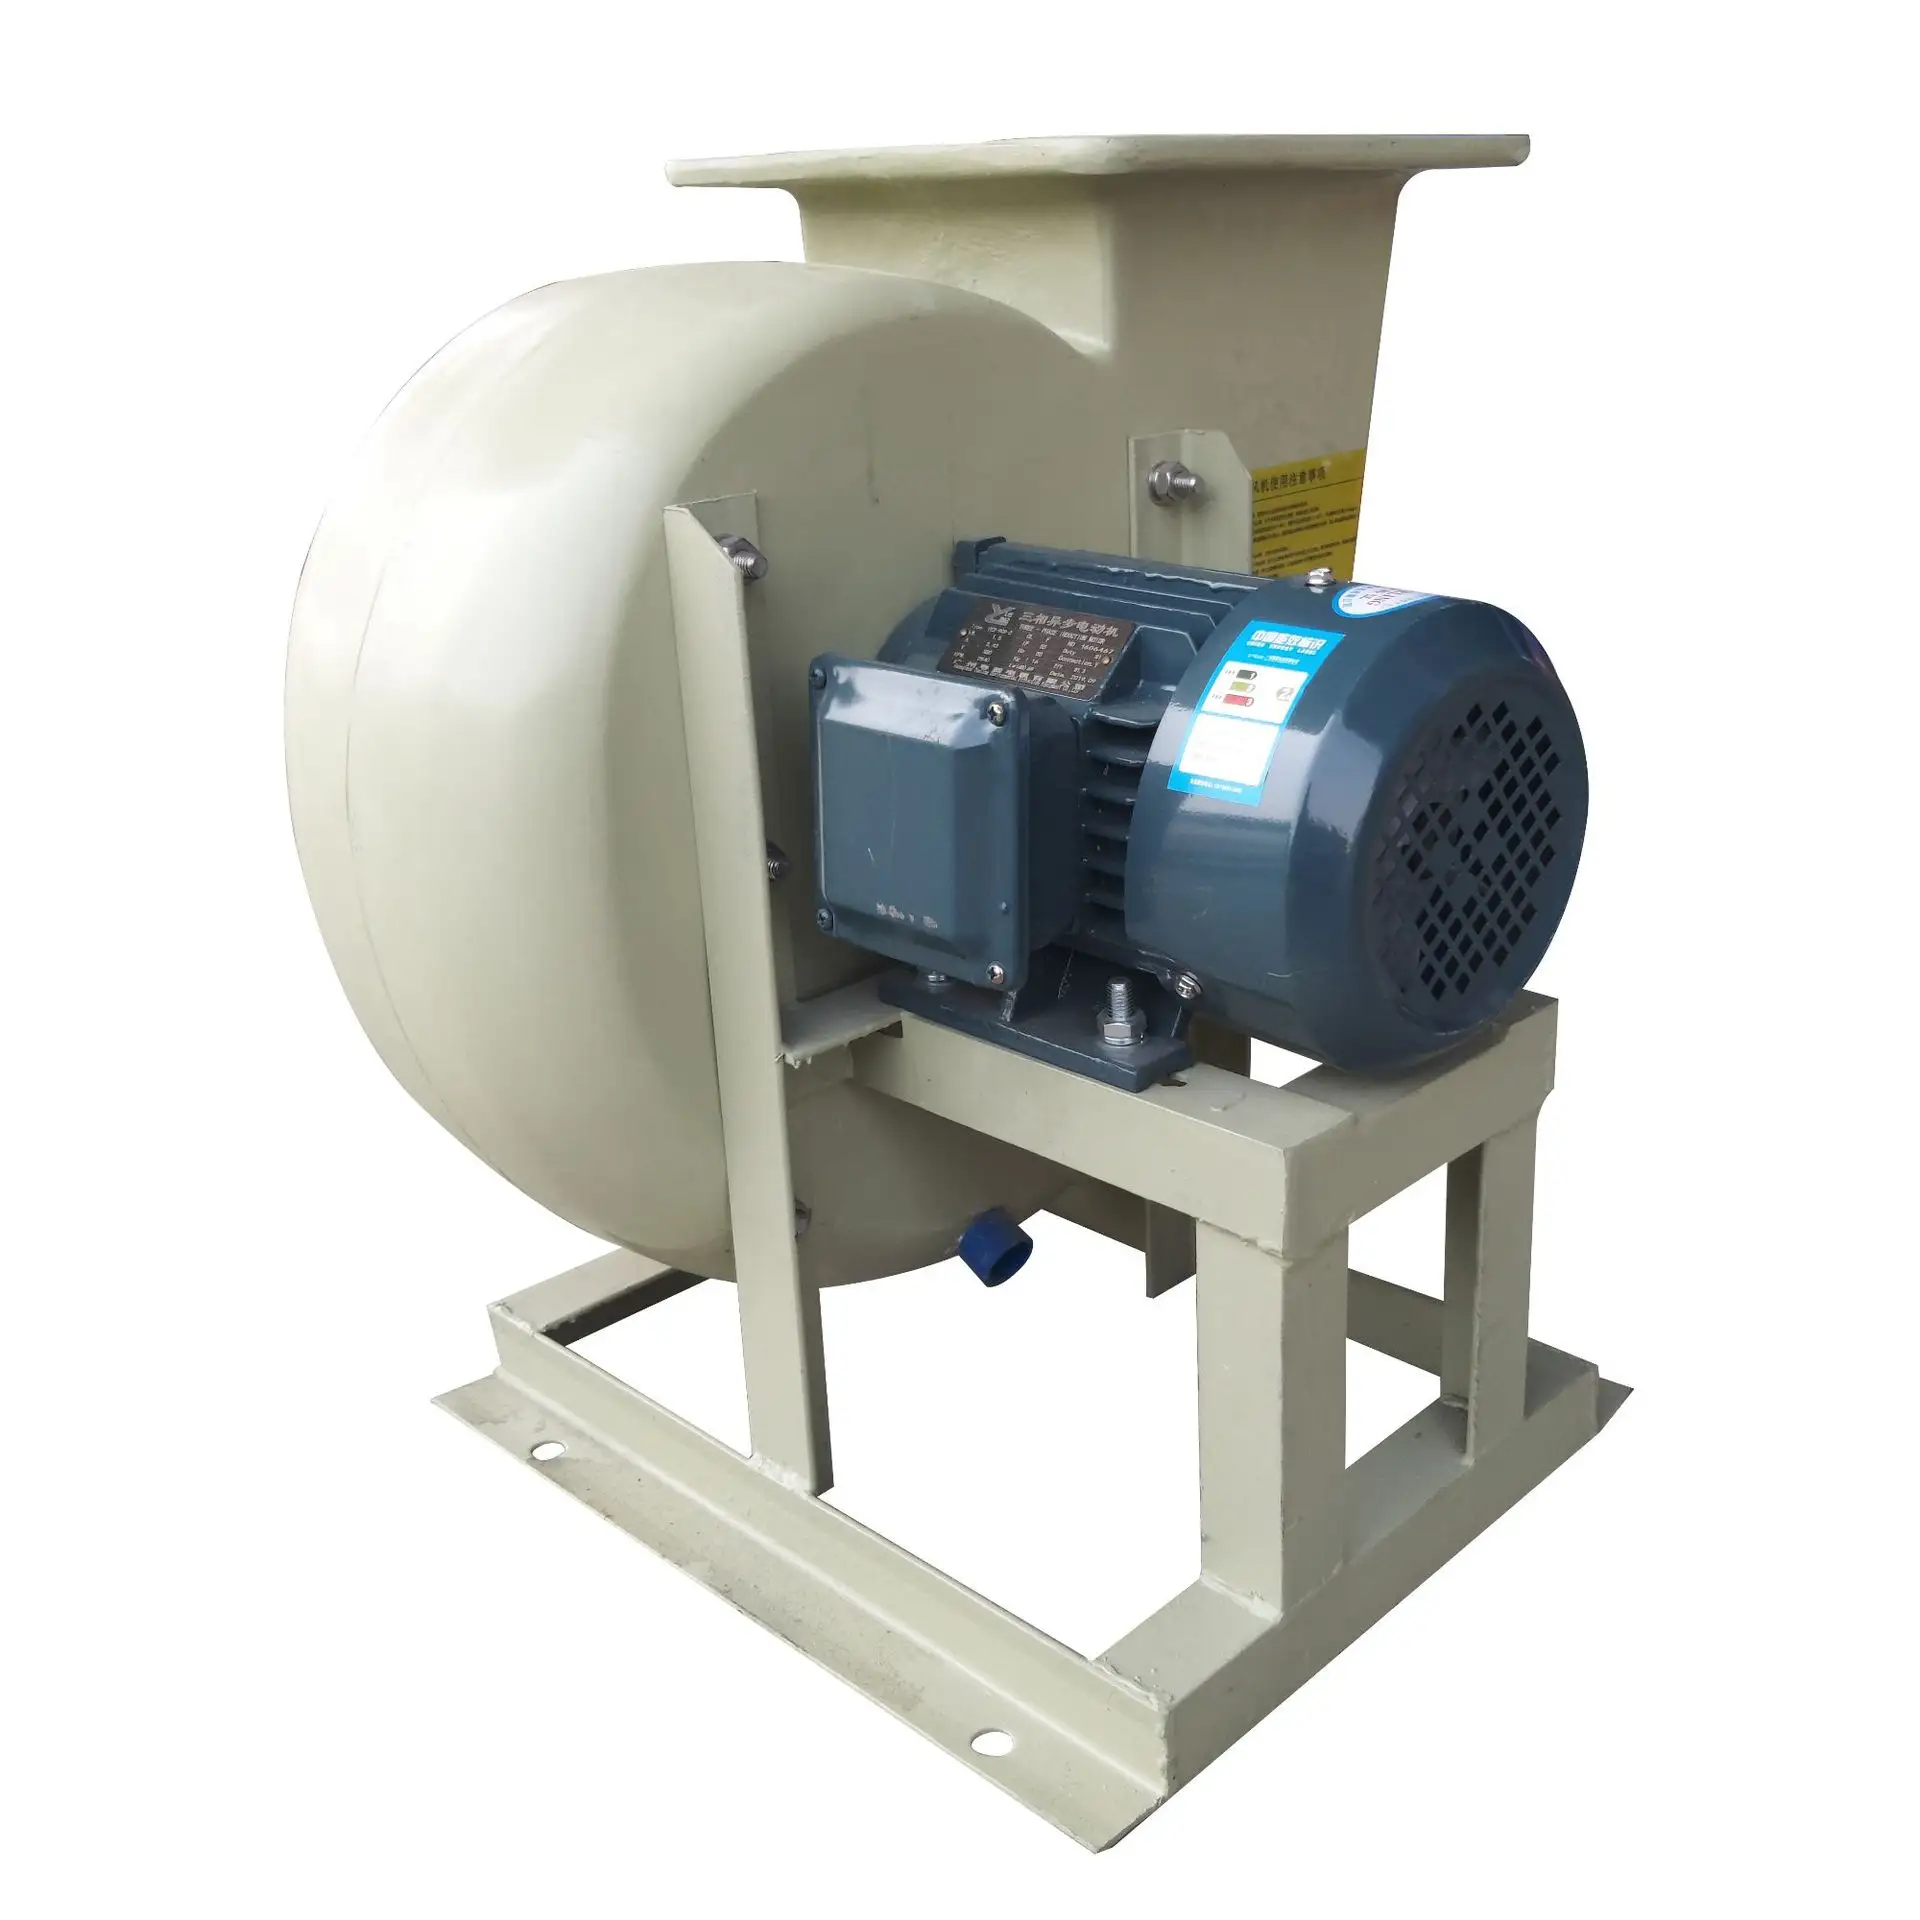 Factory Direct-supplied Blower Works Very Efficiently 2900 High Rpm Fiber Glass Air Blower Fan